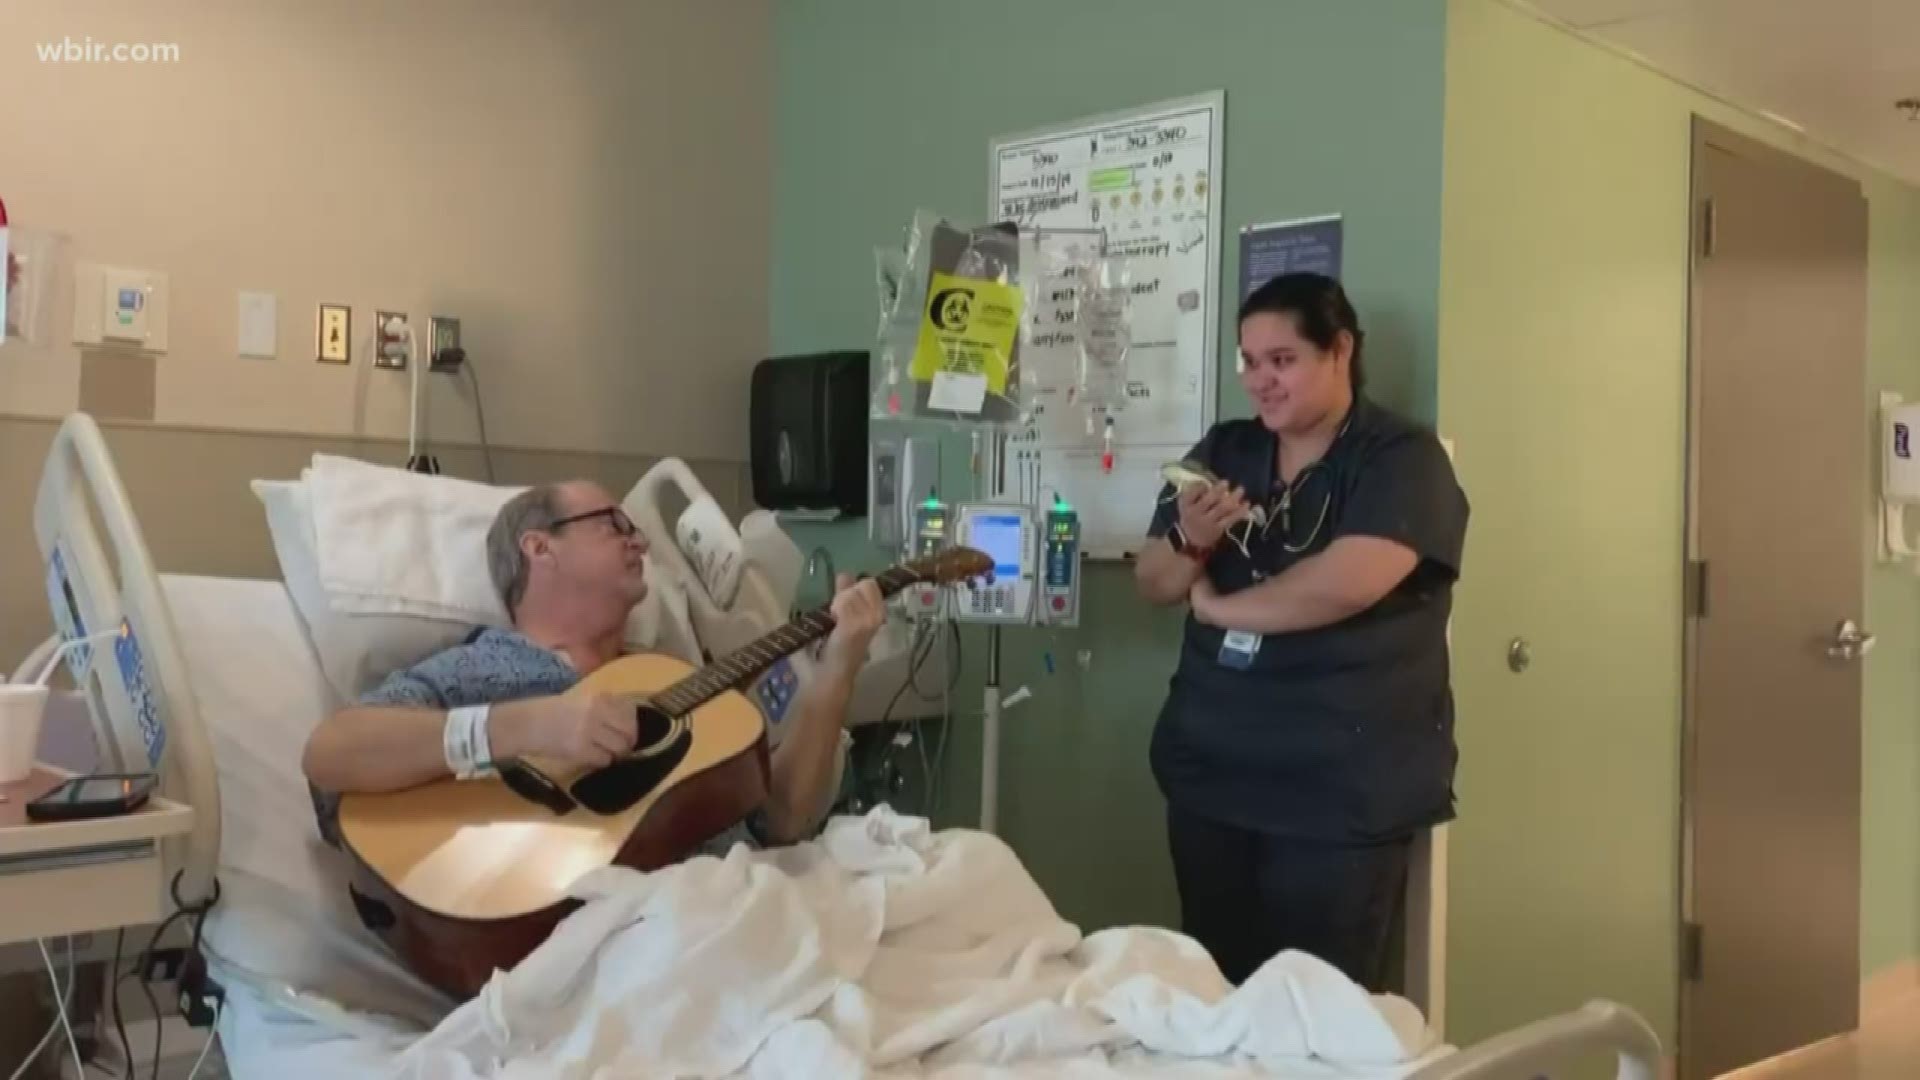 A longtime guitarist decked the halls with "O' Holy Night," singing along with a nurse in a hospital.